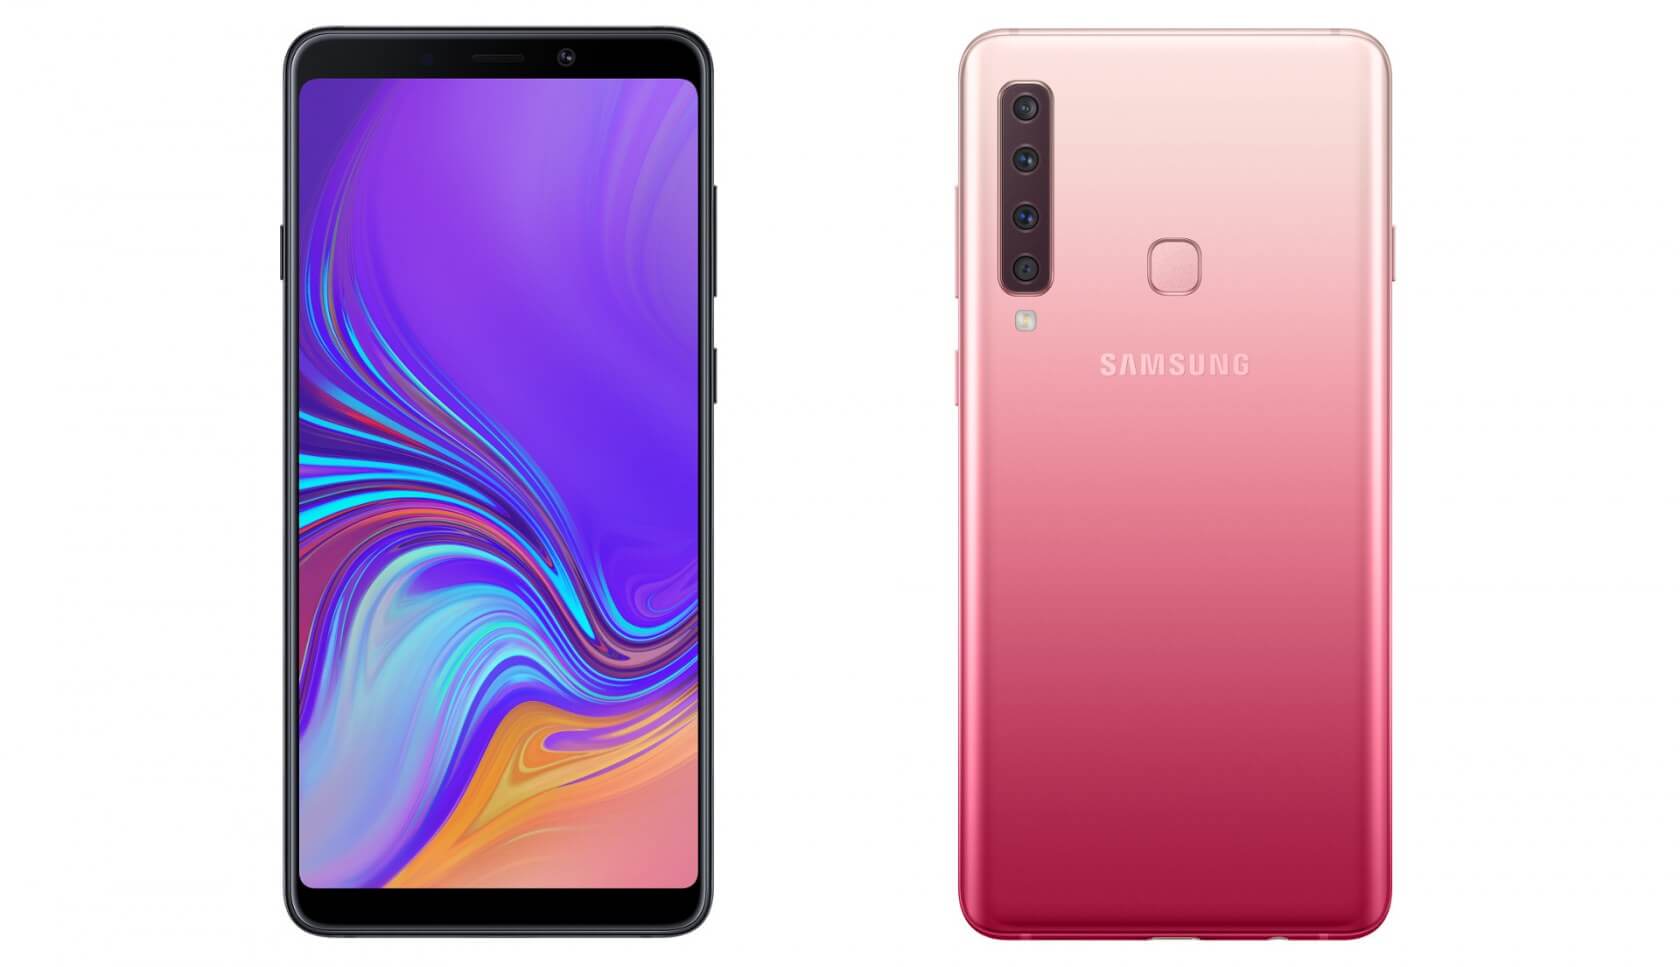 Samsung announces the Galaxy A9, a mid-range smartphone with four rear cameras